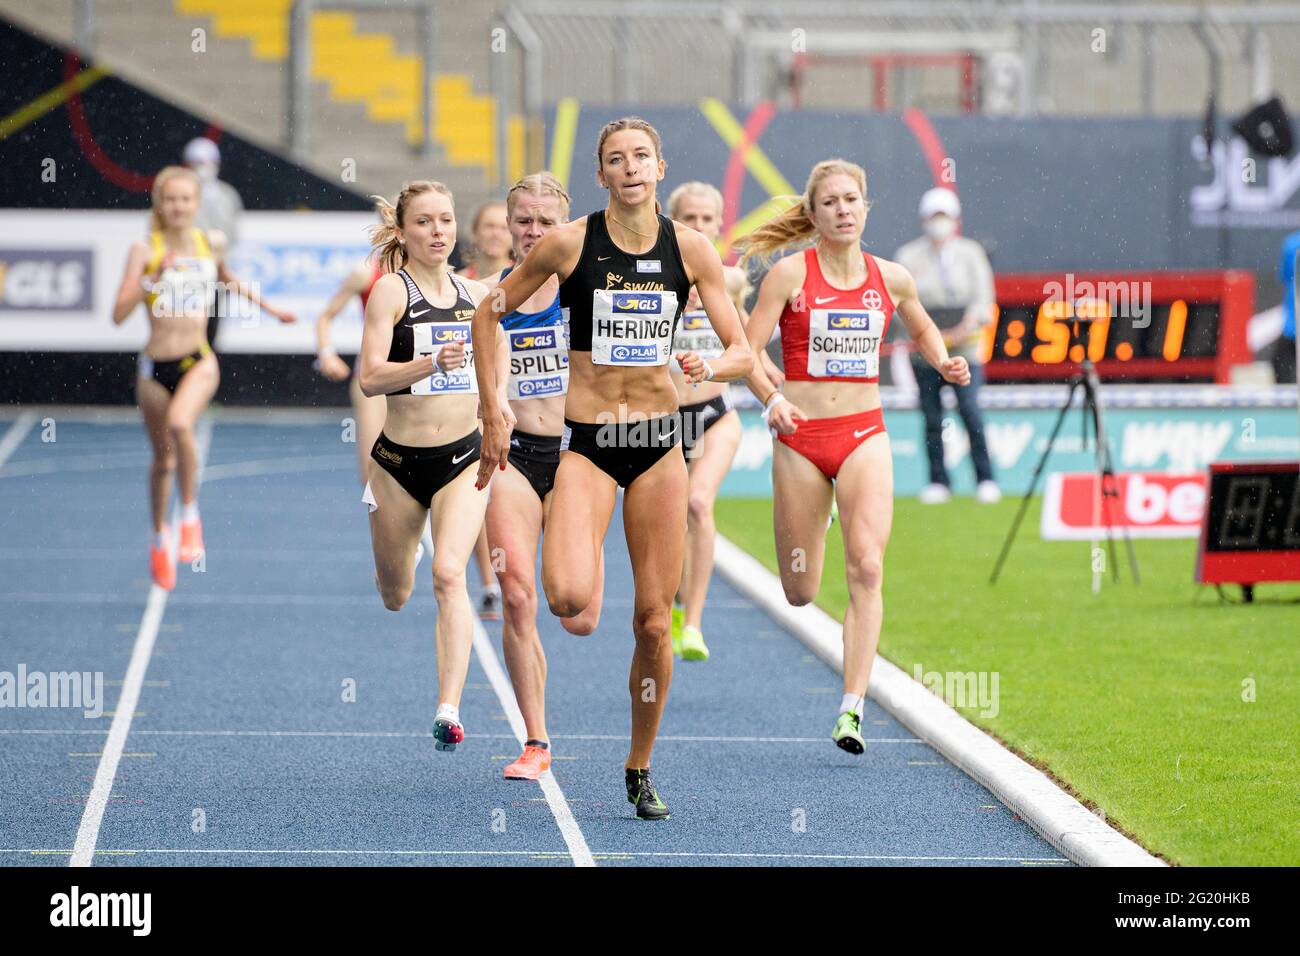 Braunschweig, Deutschland. 06th June, 2021. Winner Christina HERING (1st place/LG Stadtwerke Muenchen) action, left to right Katharina TROST (2nd place/LG Stadtwerke Muenchen), Hering, Sarah SCHMIDT (4th place/TSV Bayer o4 Leverkusen) 800m women final, on 06.06. 2021 German Athletics Championships 2021, from 04.06. - 06.06.2021 in Braunschweig/Germany. ¬ Credit: dpa/Alamy Live News Stock Photo